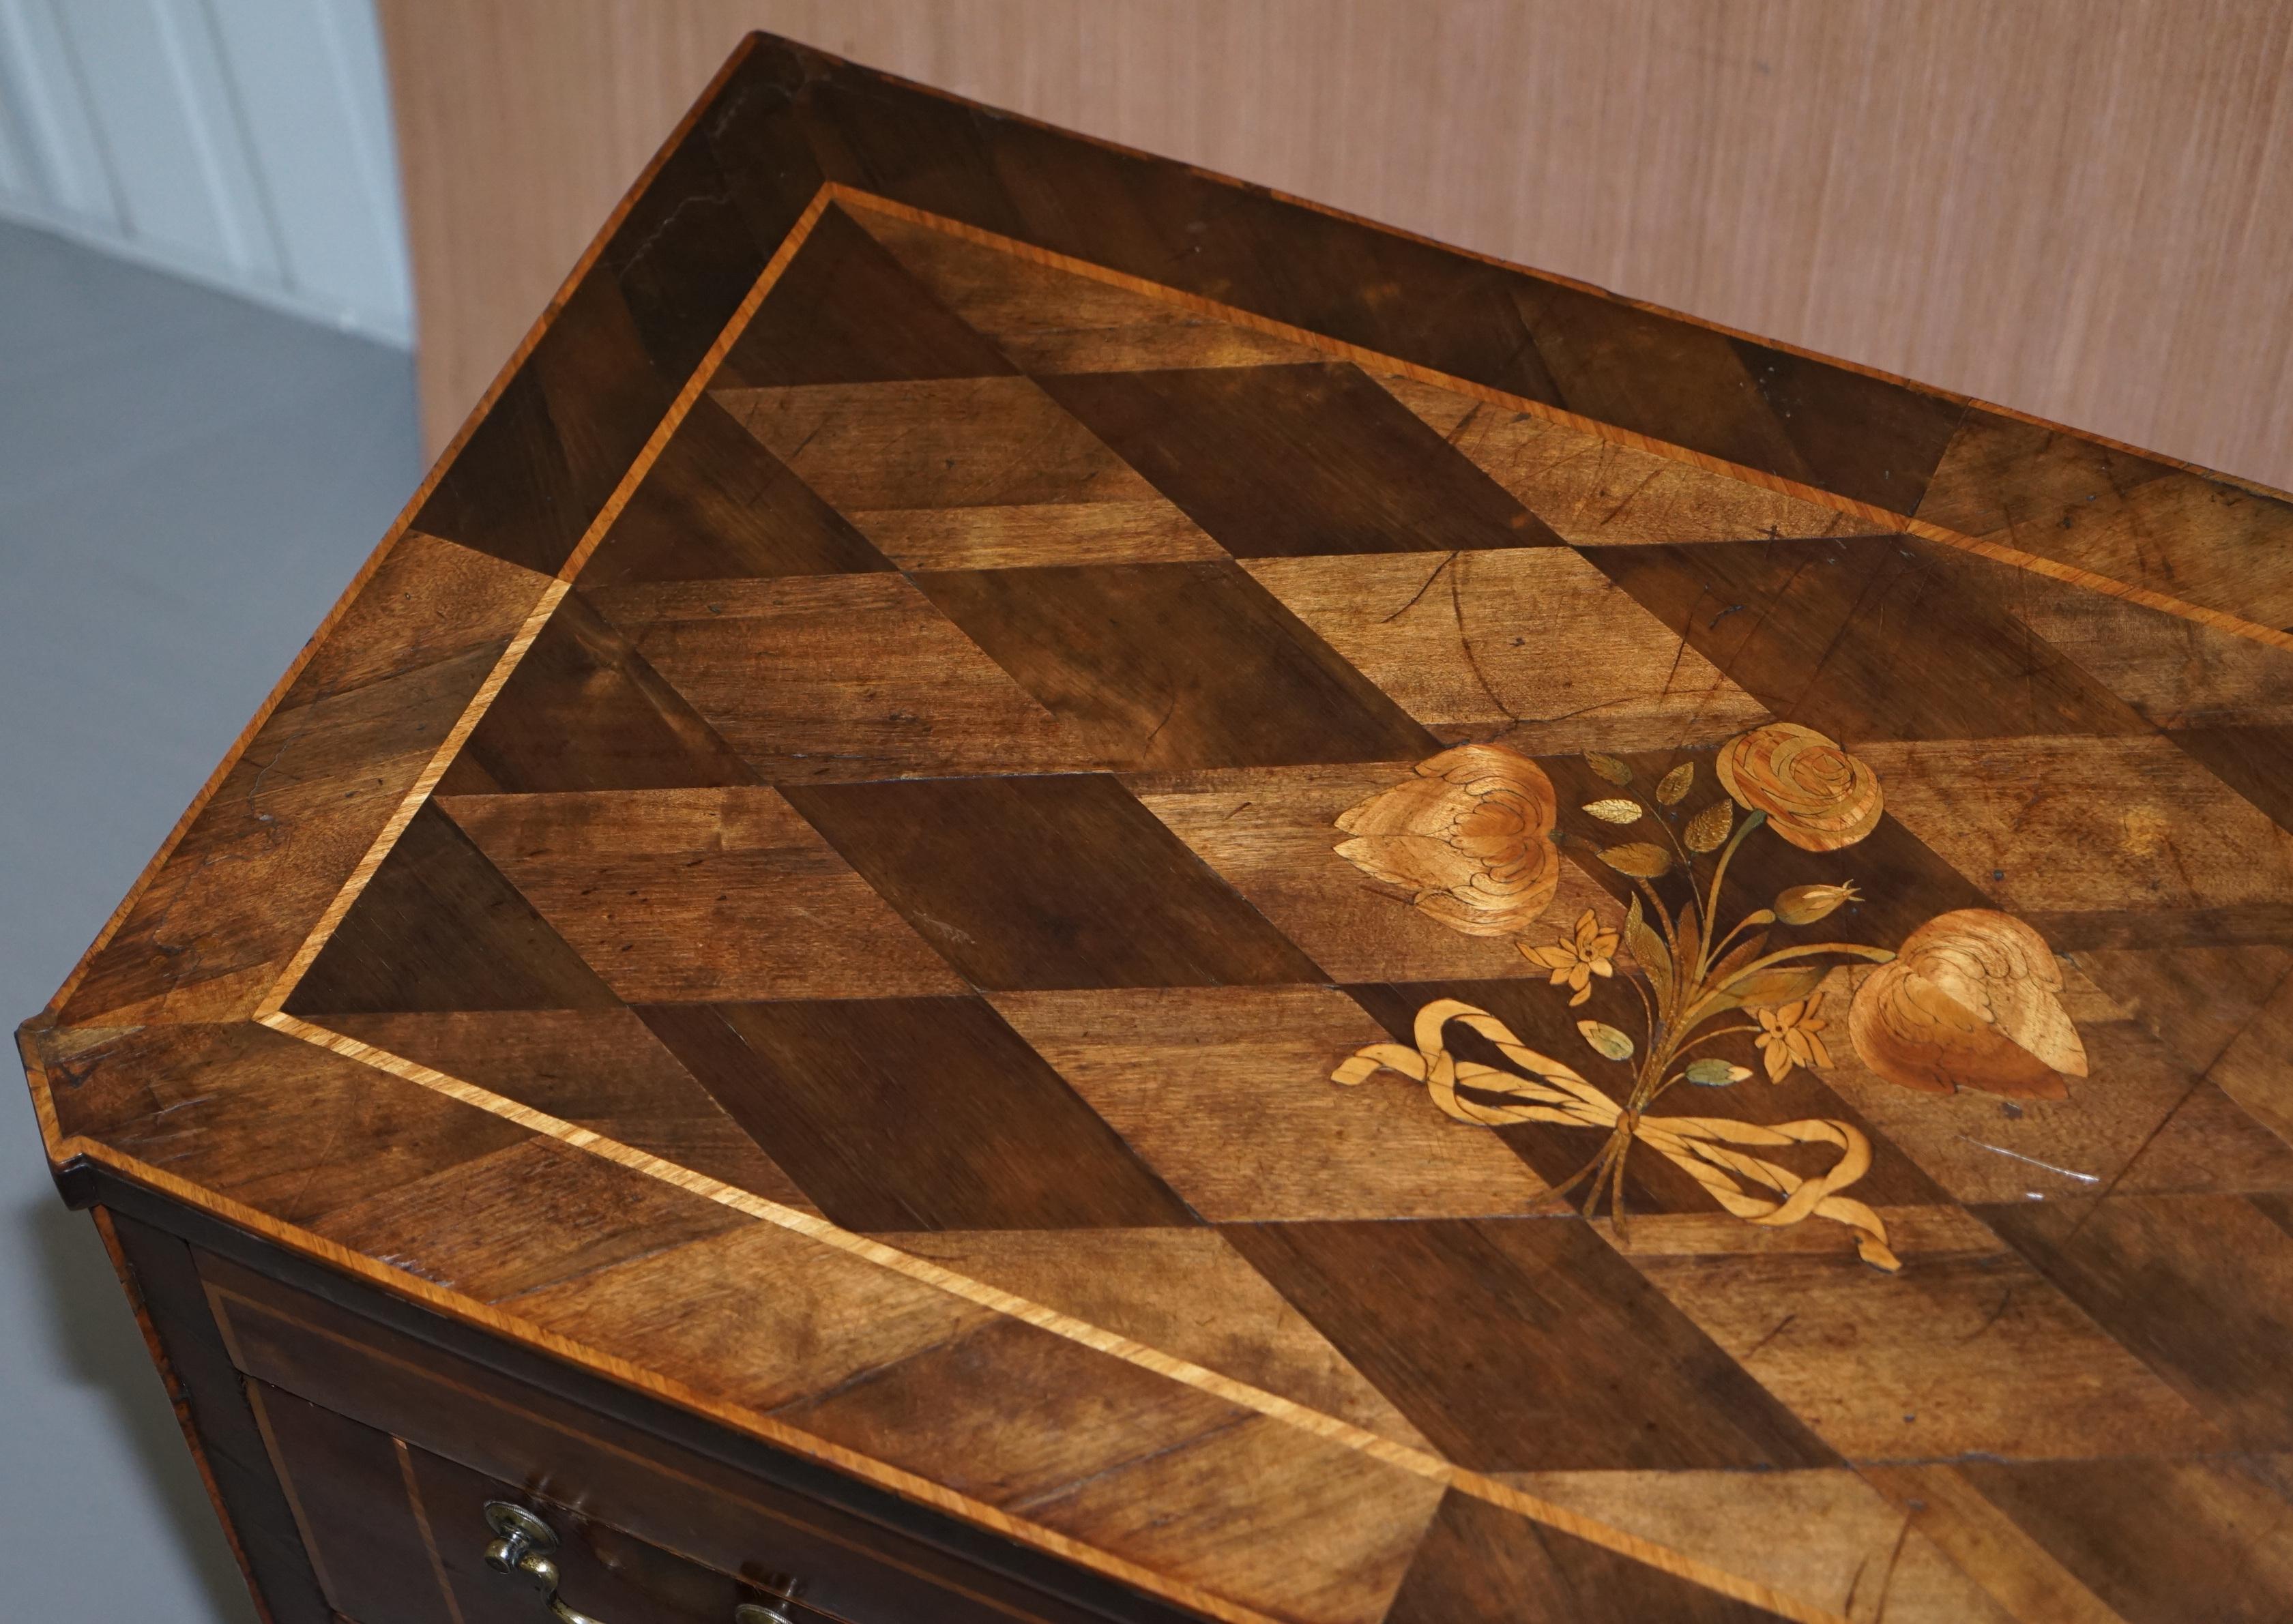 Late 18th Century Rare circa 1780 Continental Parquetry Marquetry Inlaid Commode Chest of Drawers For Sale